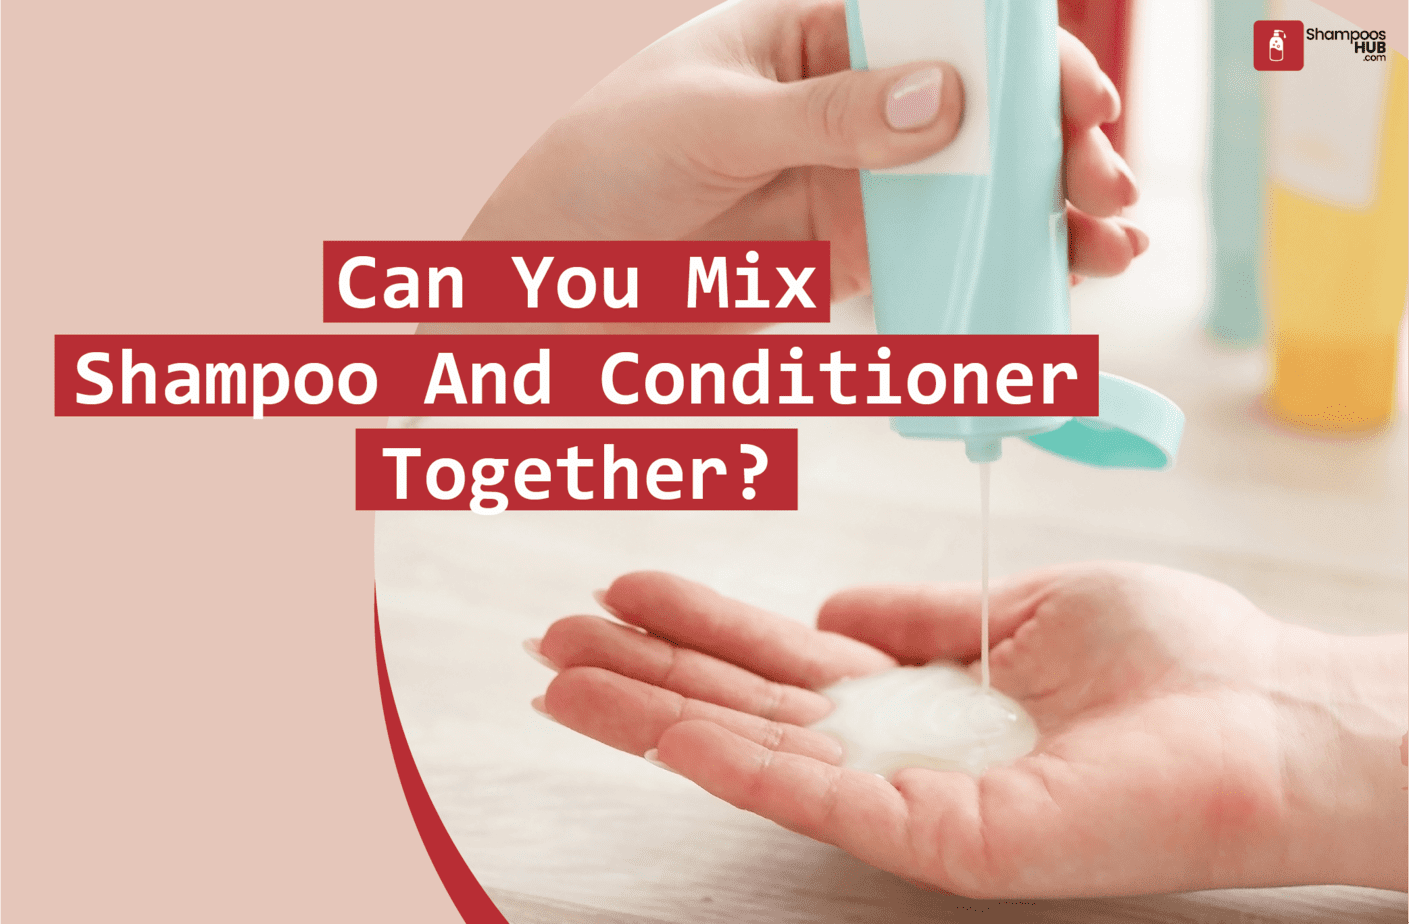 Can You Mix Shampoo And Conditioner Together?